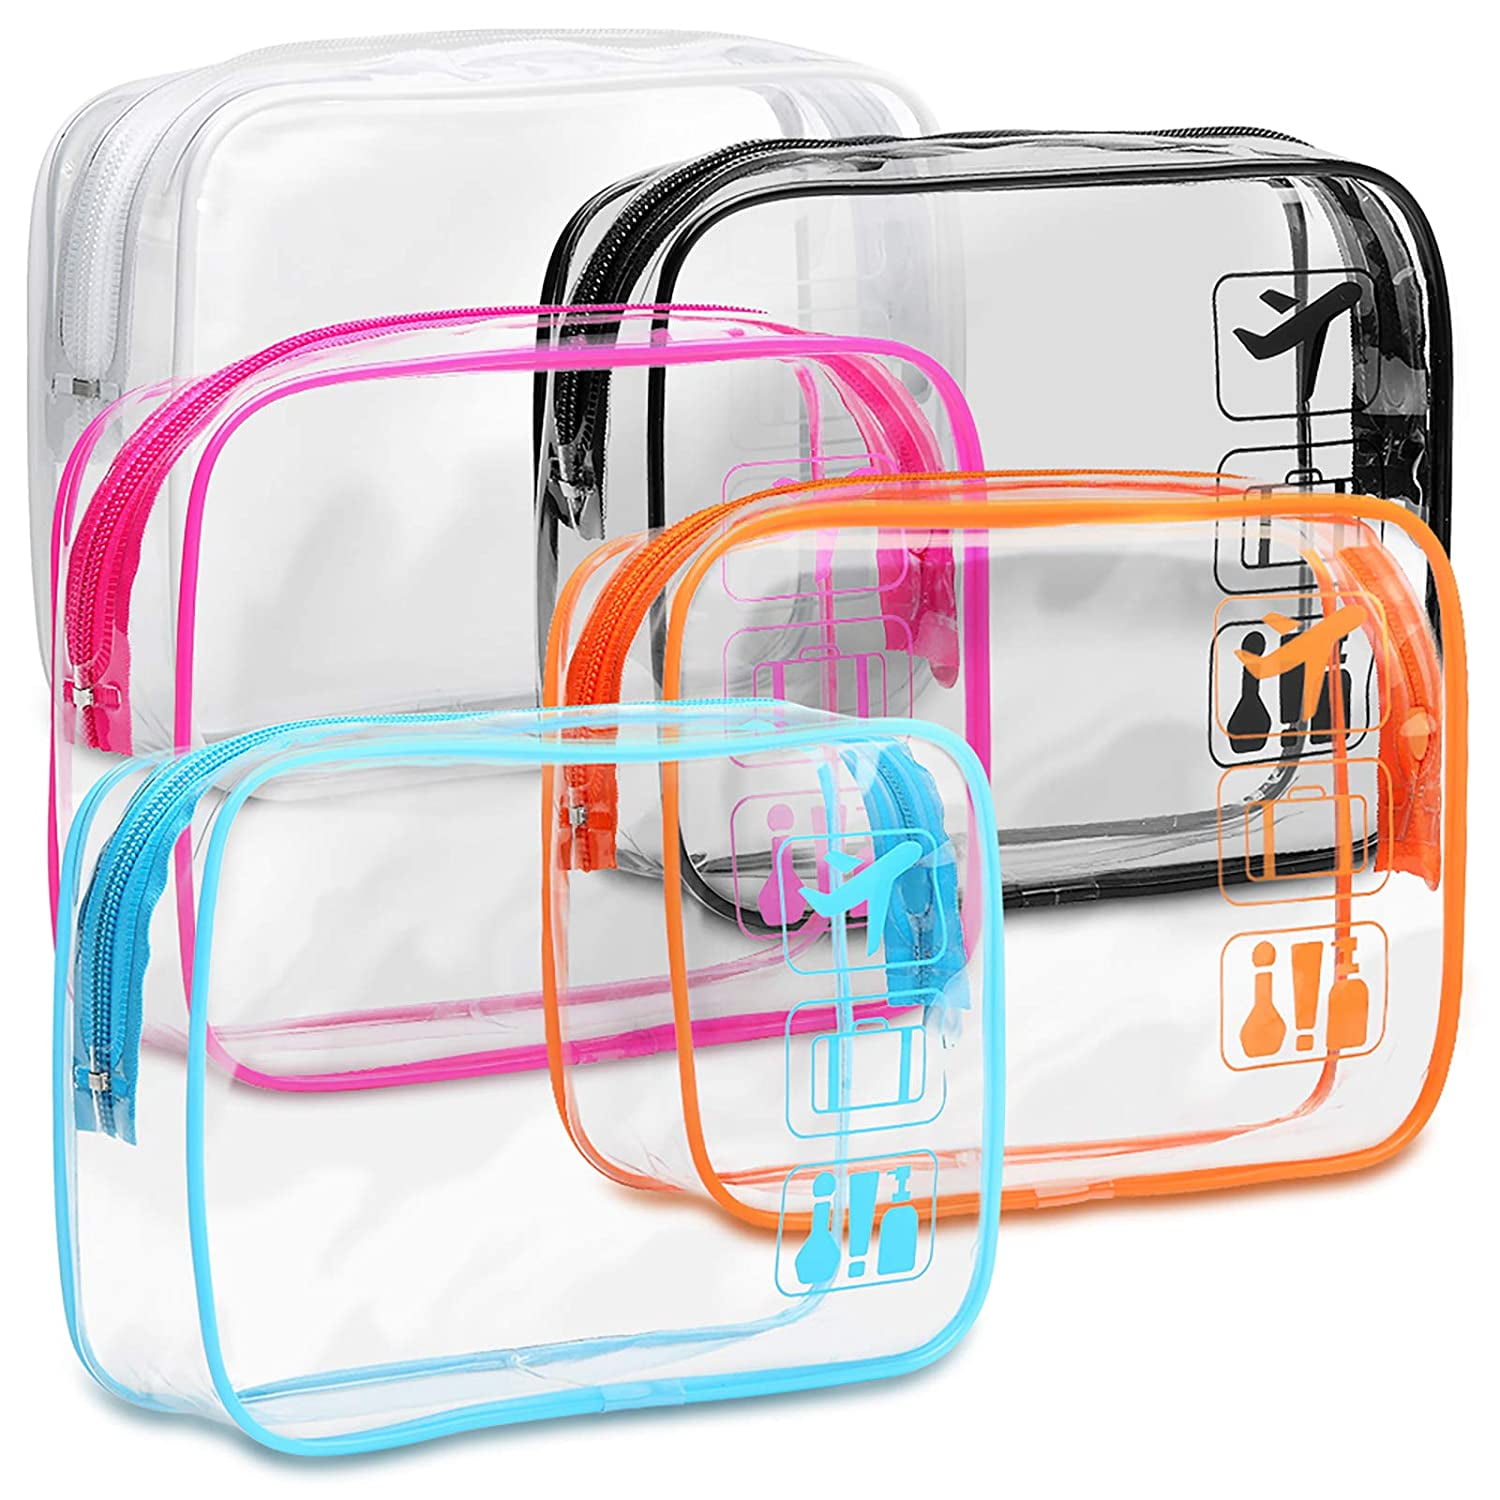 Quart-Size Carry-On Clear Bag TSA Approved Fly Travel Bag 2-Pack